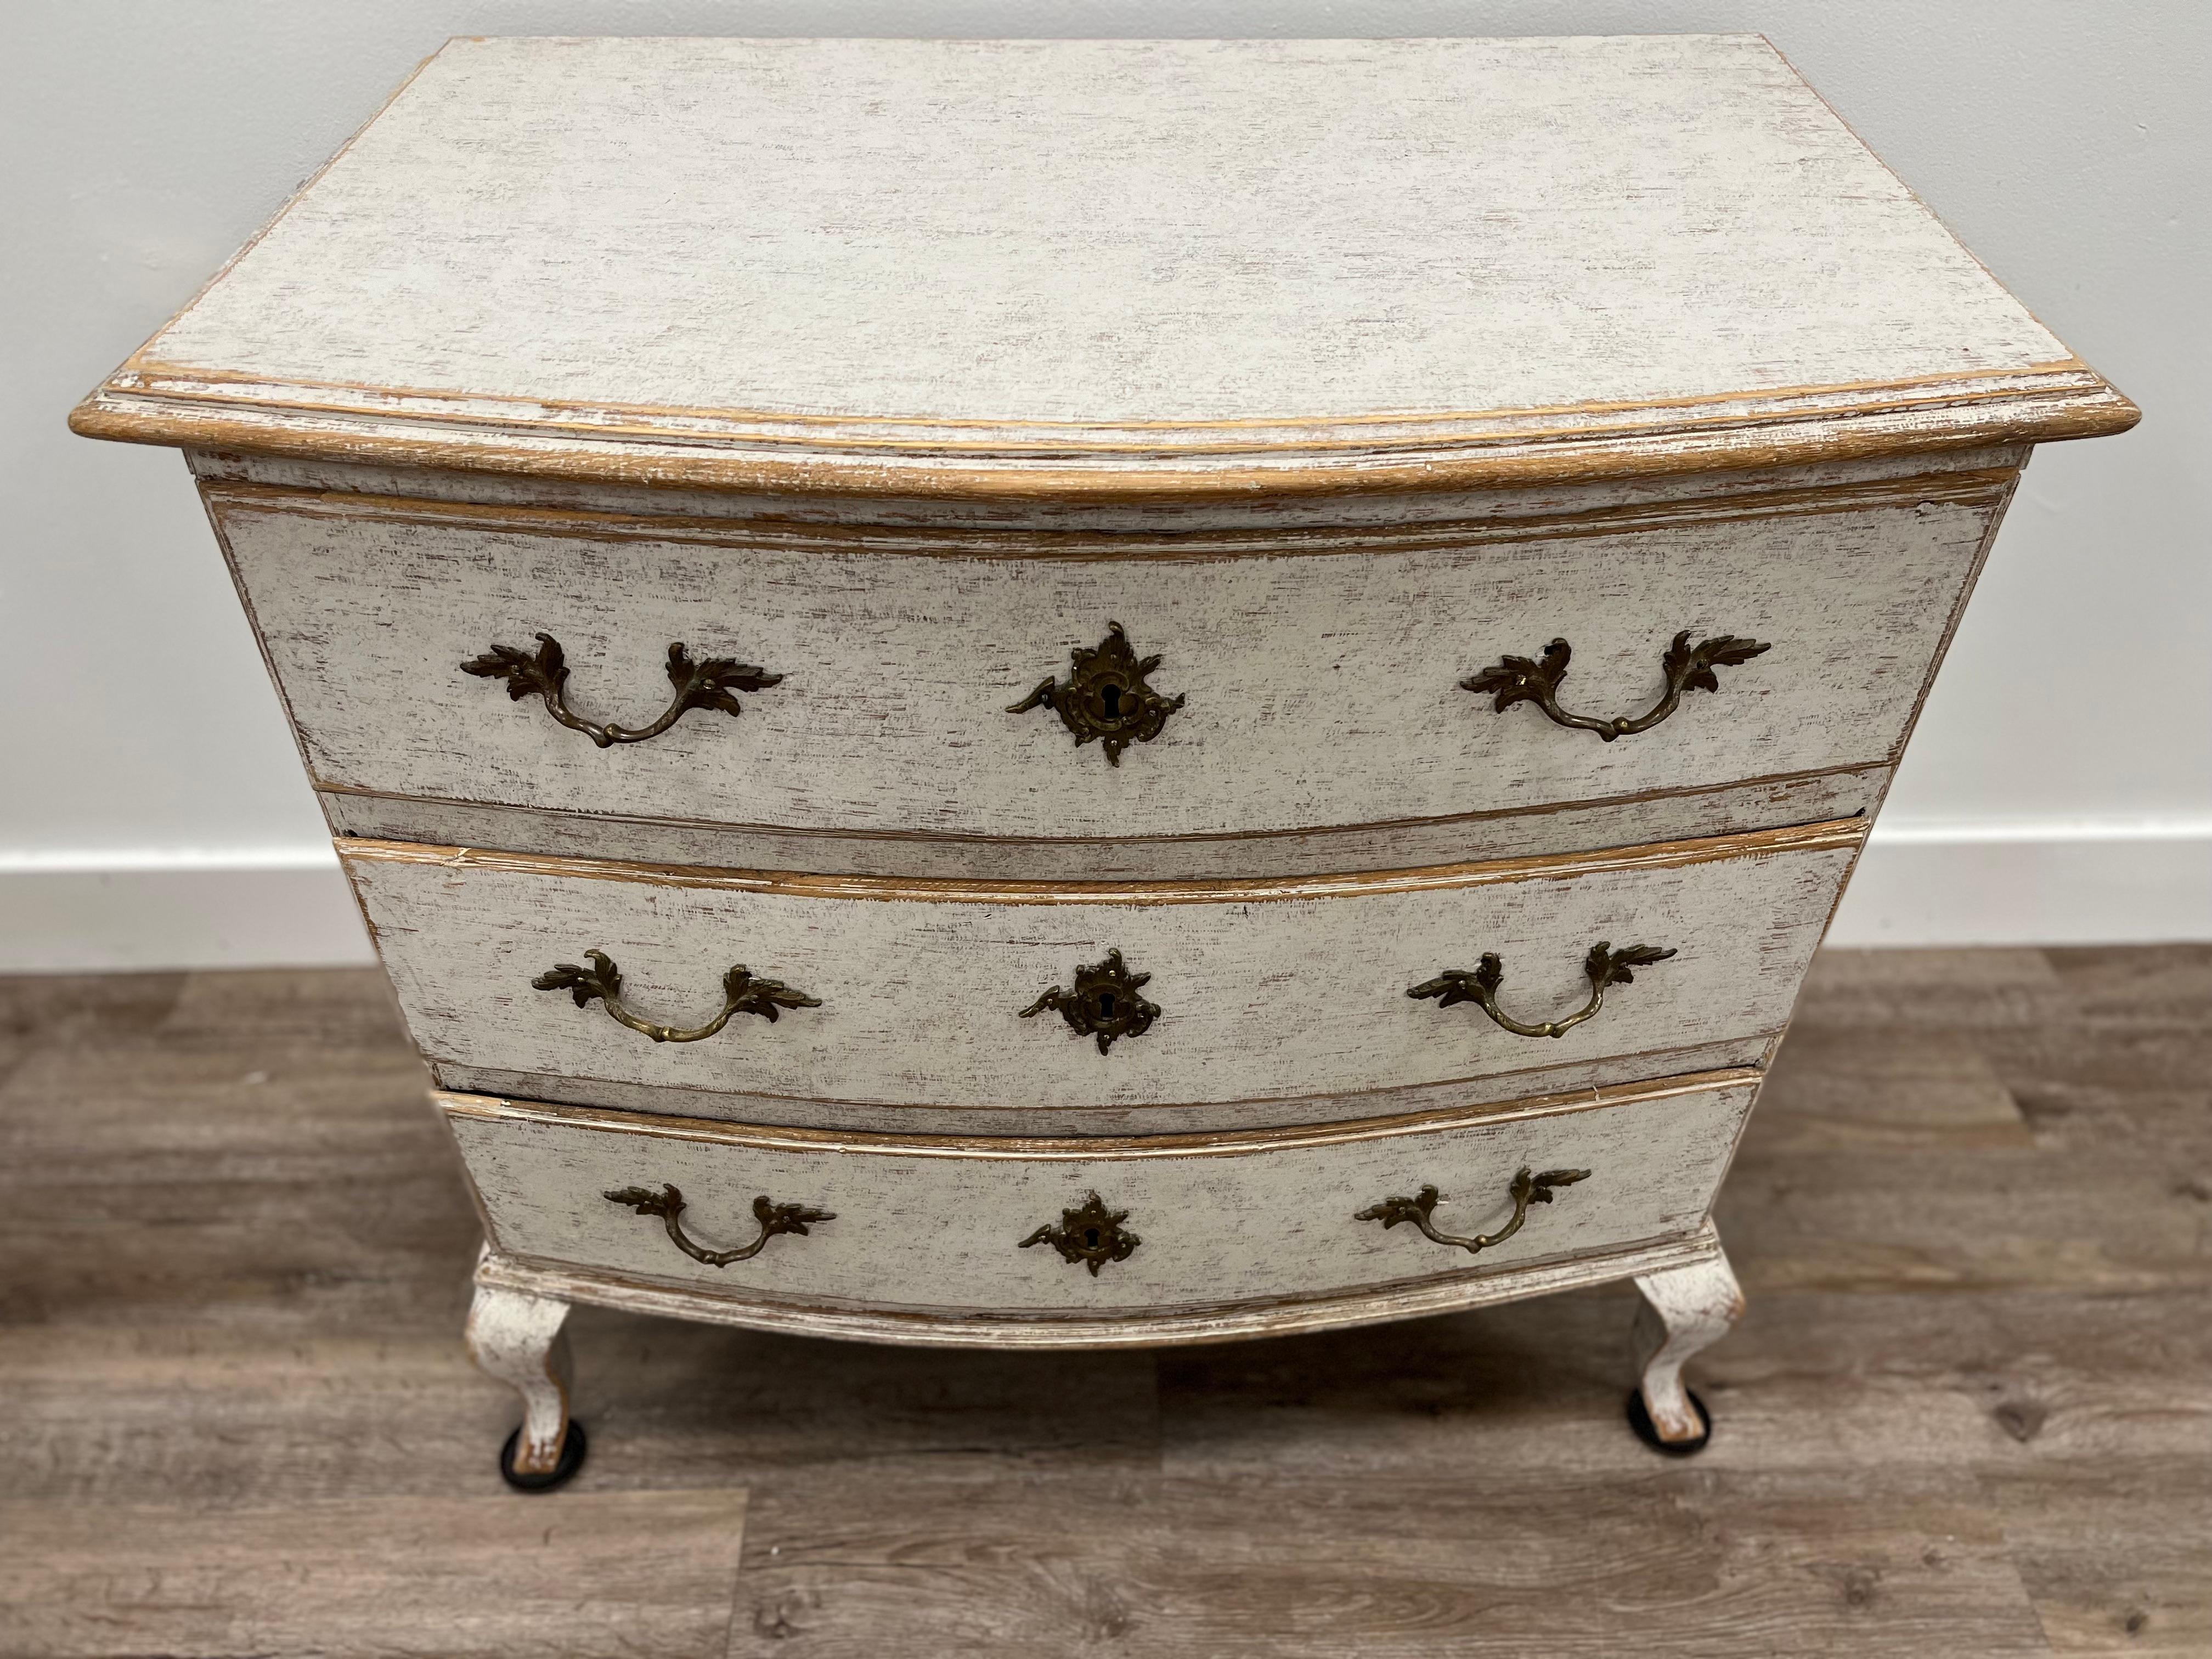 A Swedish Rococo commode repainted in faint pale grey with original brass hardware and locks. Three bow front drawers over cabriolet legs.